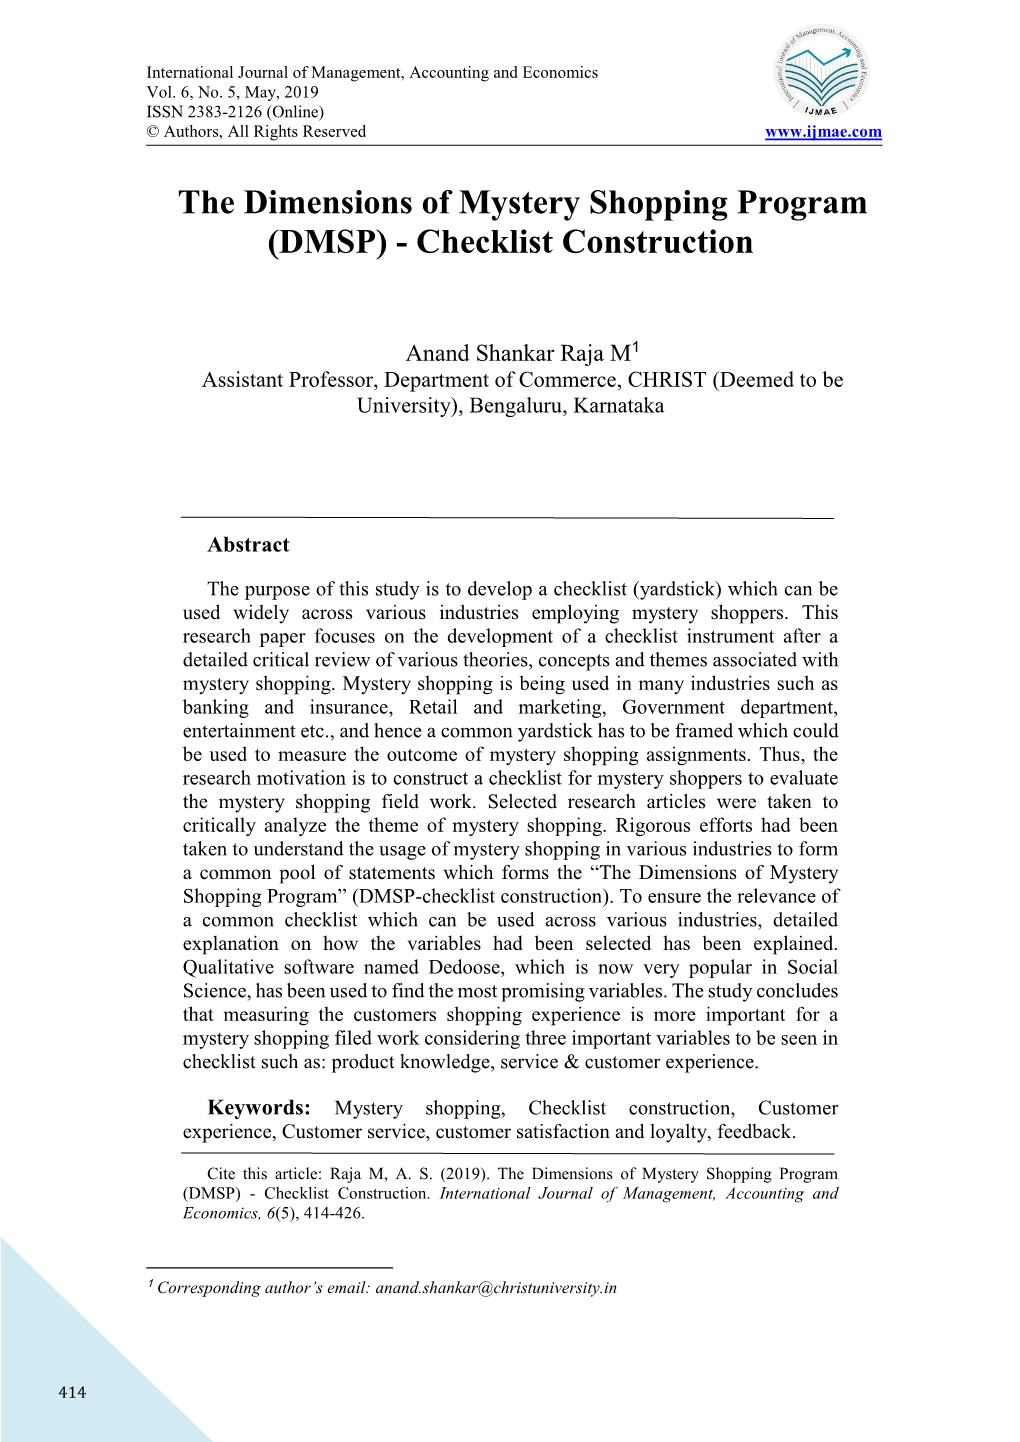 The Dimensions of Mystery Shopping Program (DMSP) - Checklist Construction